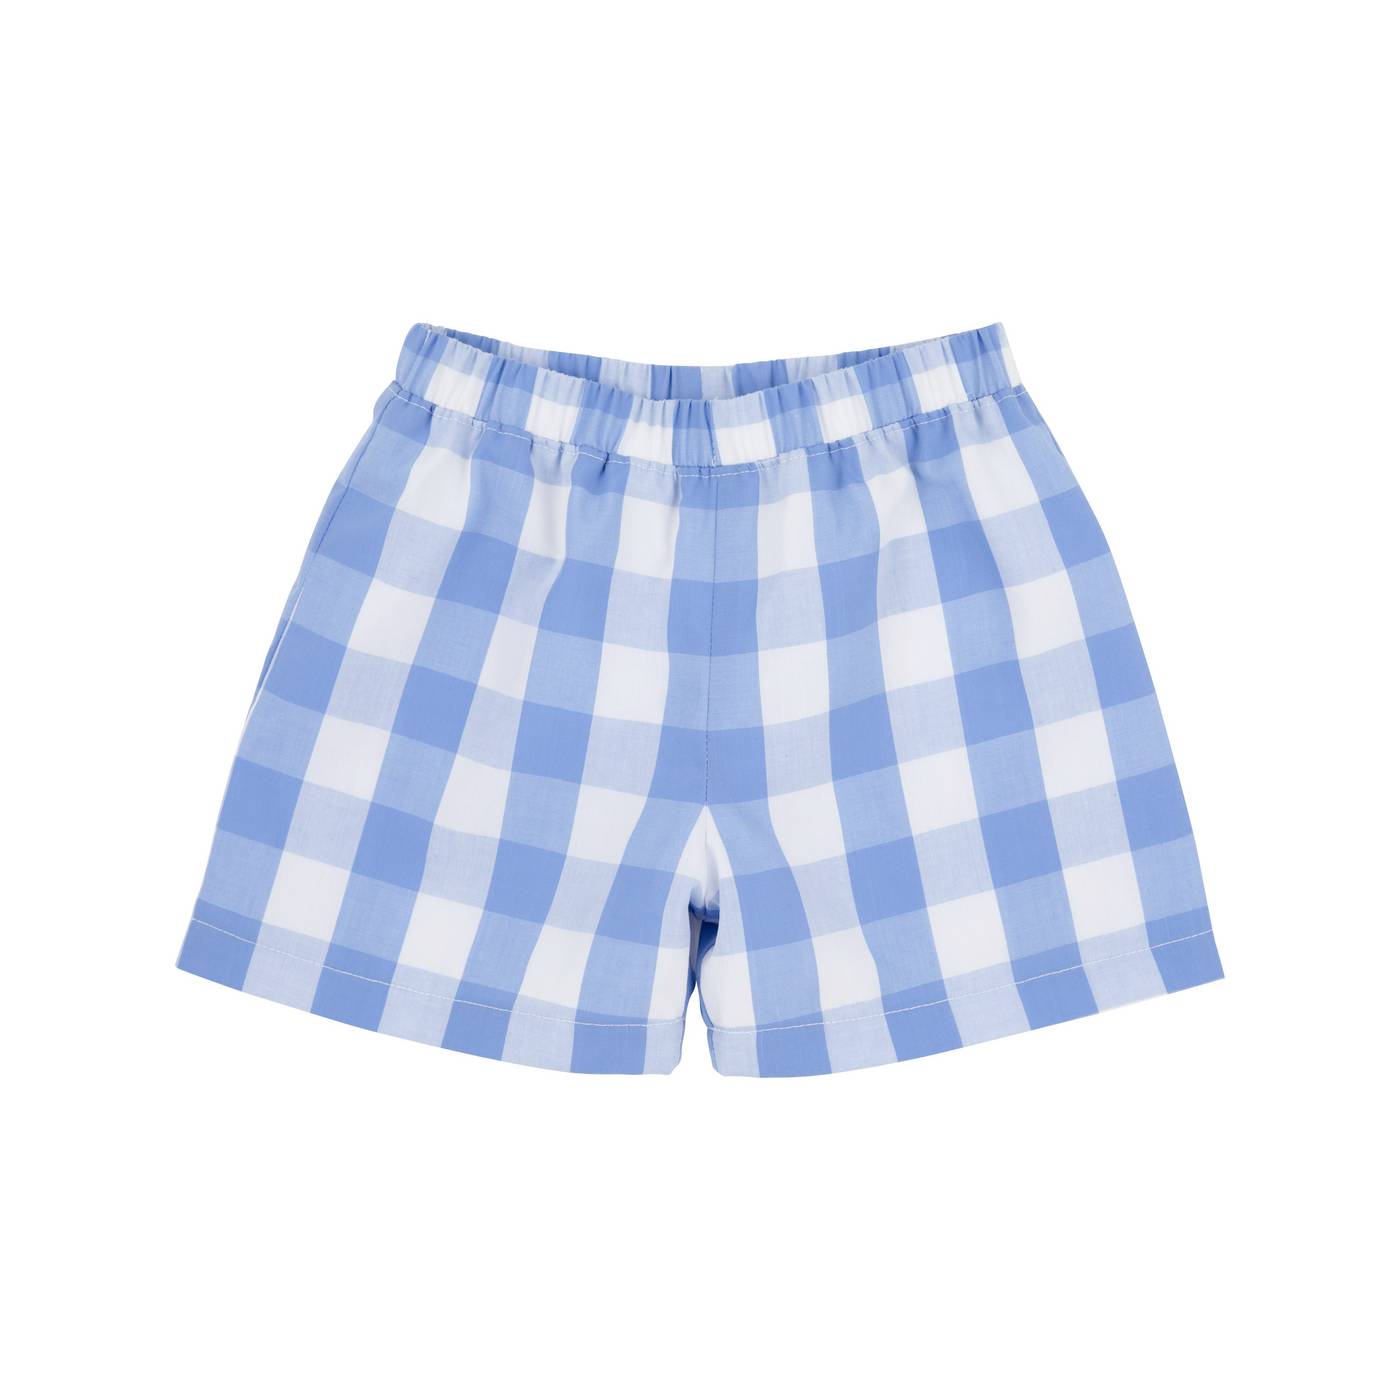 Shelton Shorts - Park City Periwinkle Chattanooga Check With Worth Avenue White